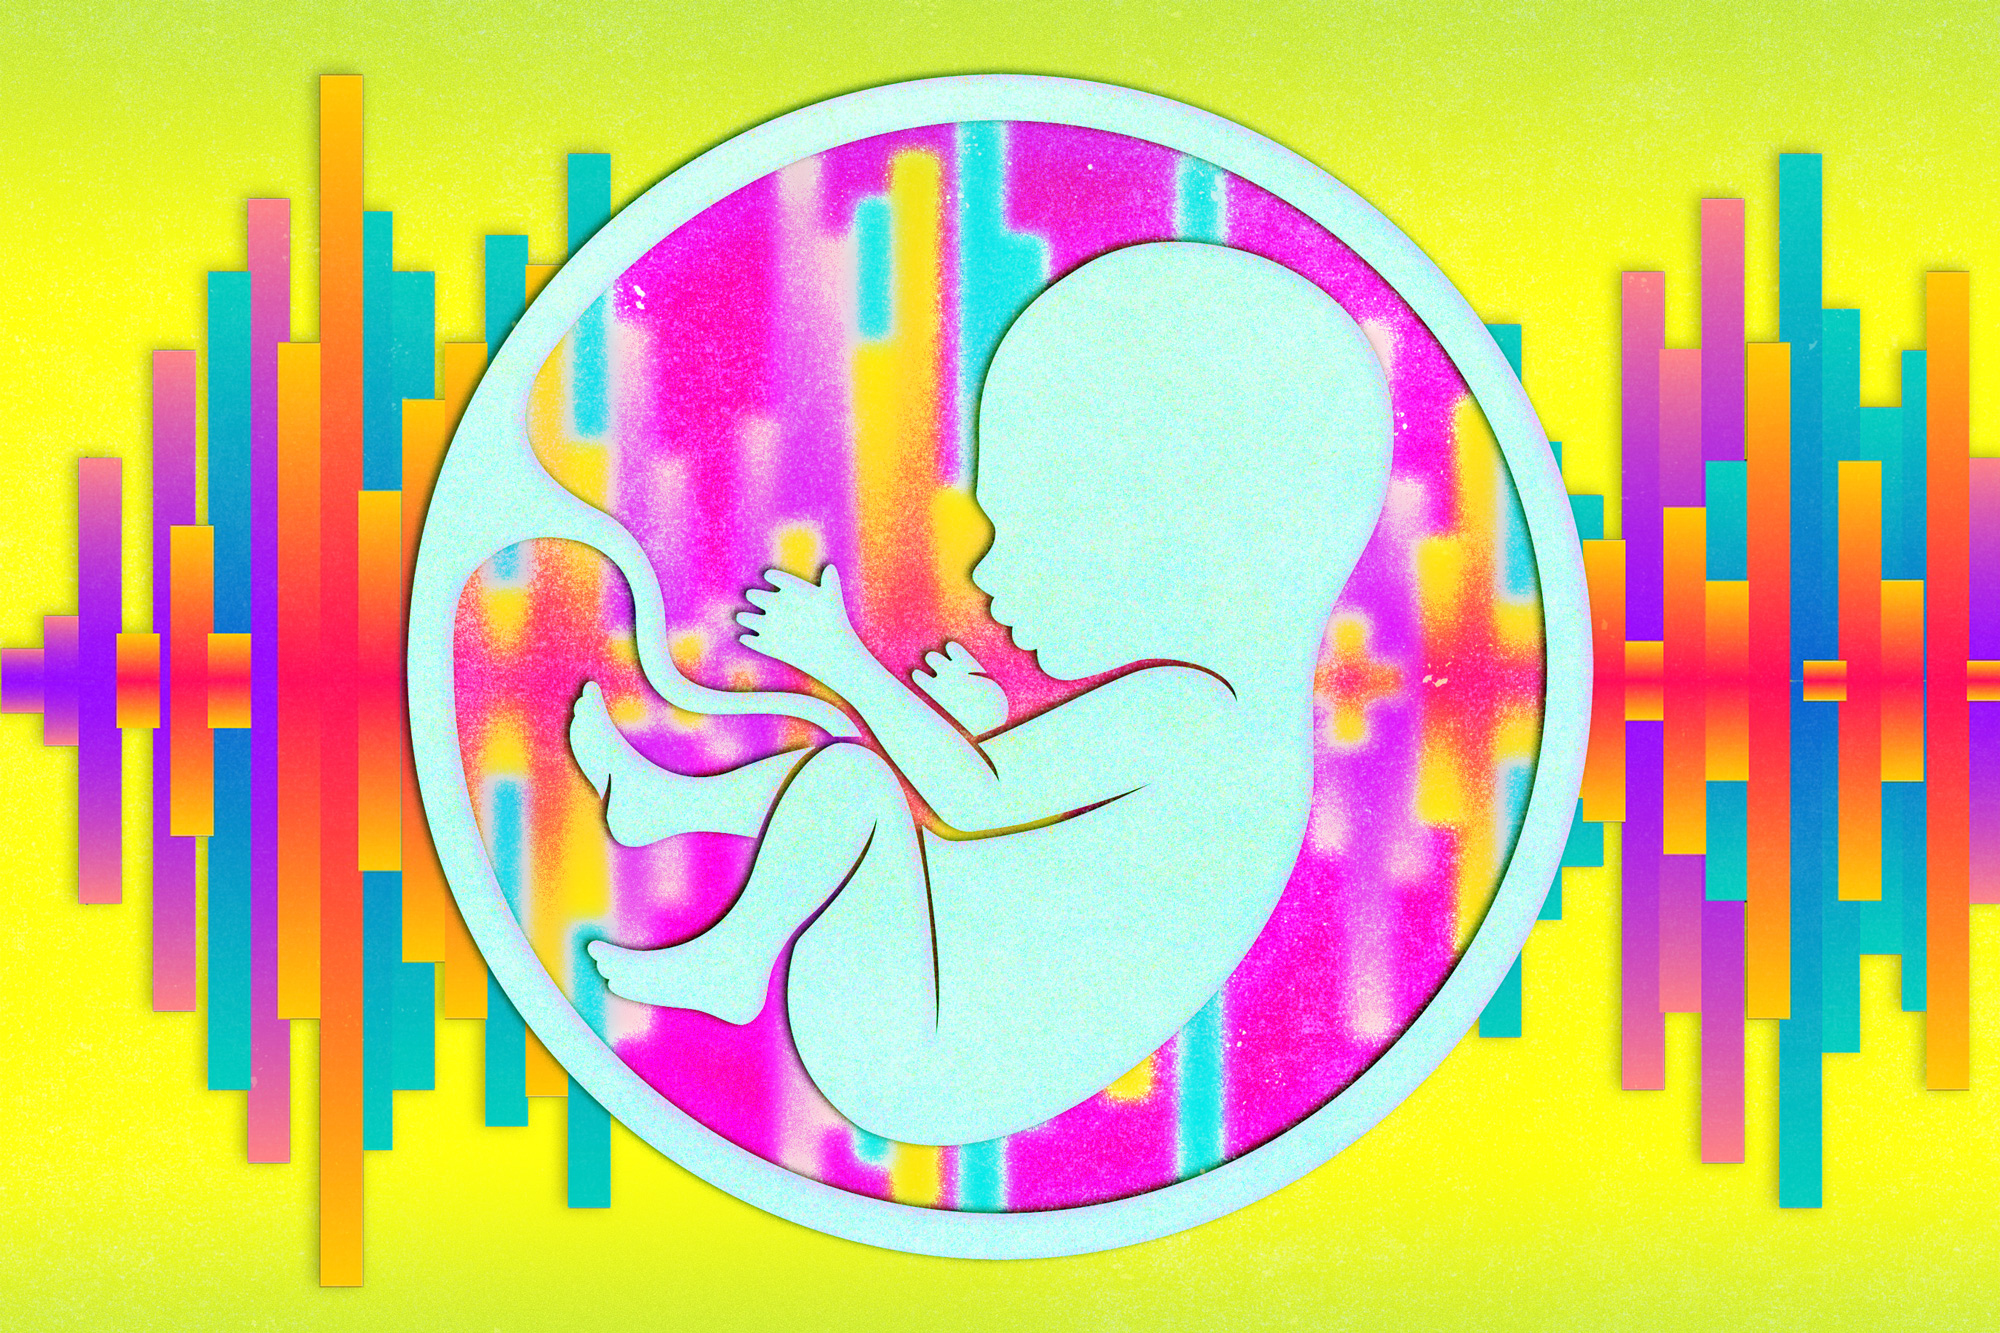 Early sound exposure in the womb shapes the auditory system